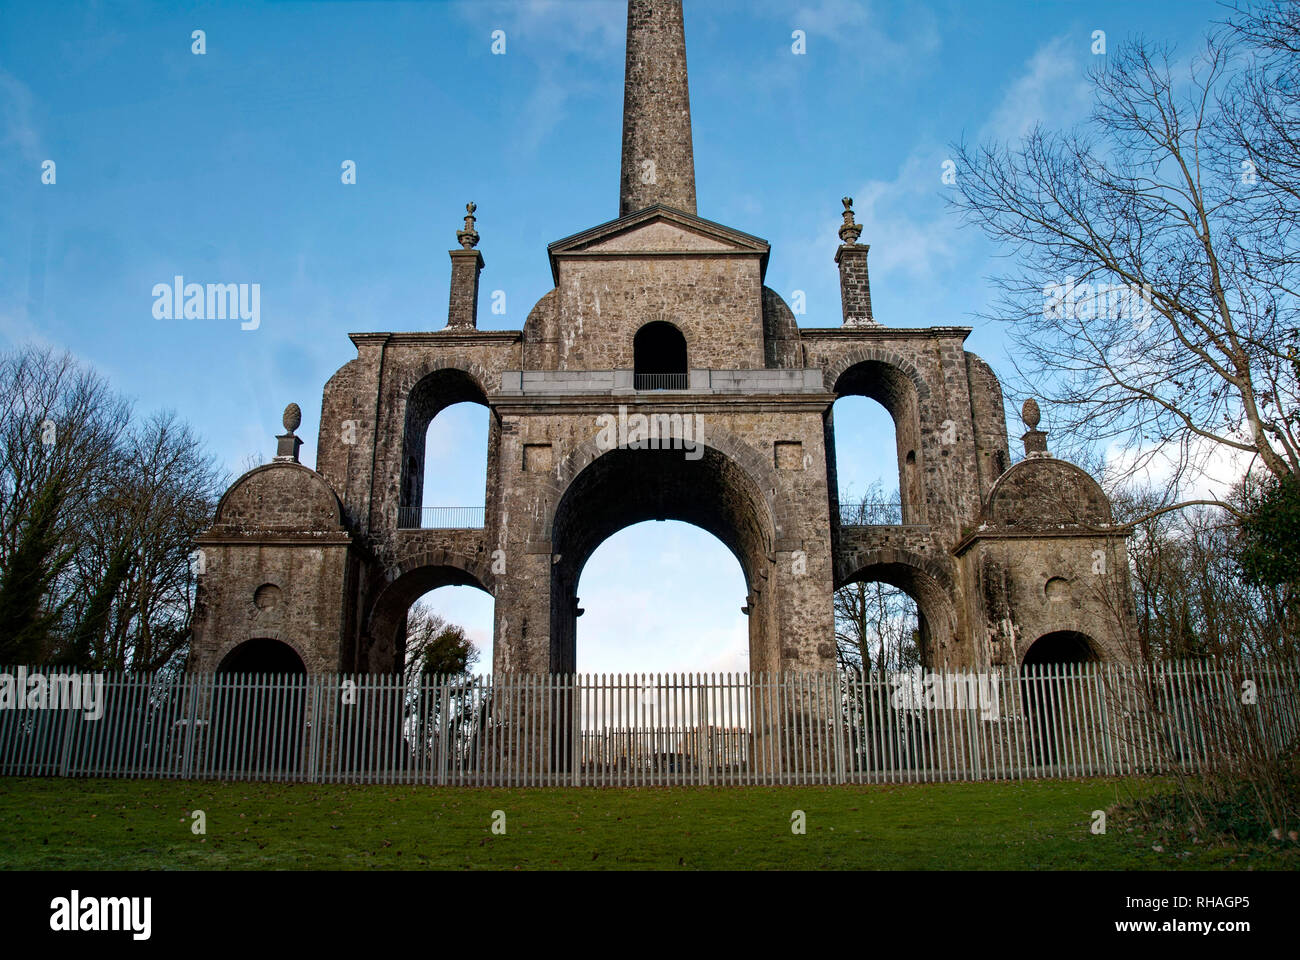 Conolly's Folly,The Obelisk,originally The Conolly Folly,is an obelisk structure and National Monument located near Maynooth,County Kildare,Ireland. Stock Photo